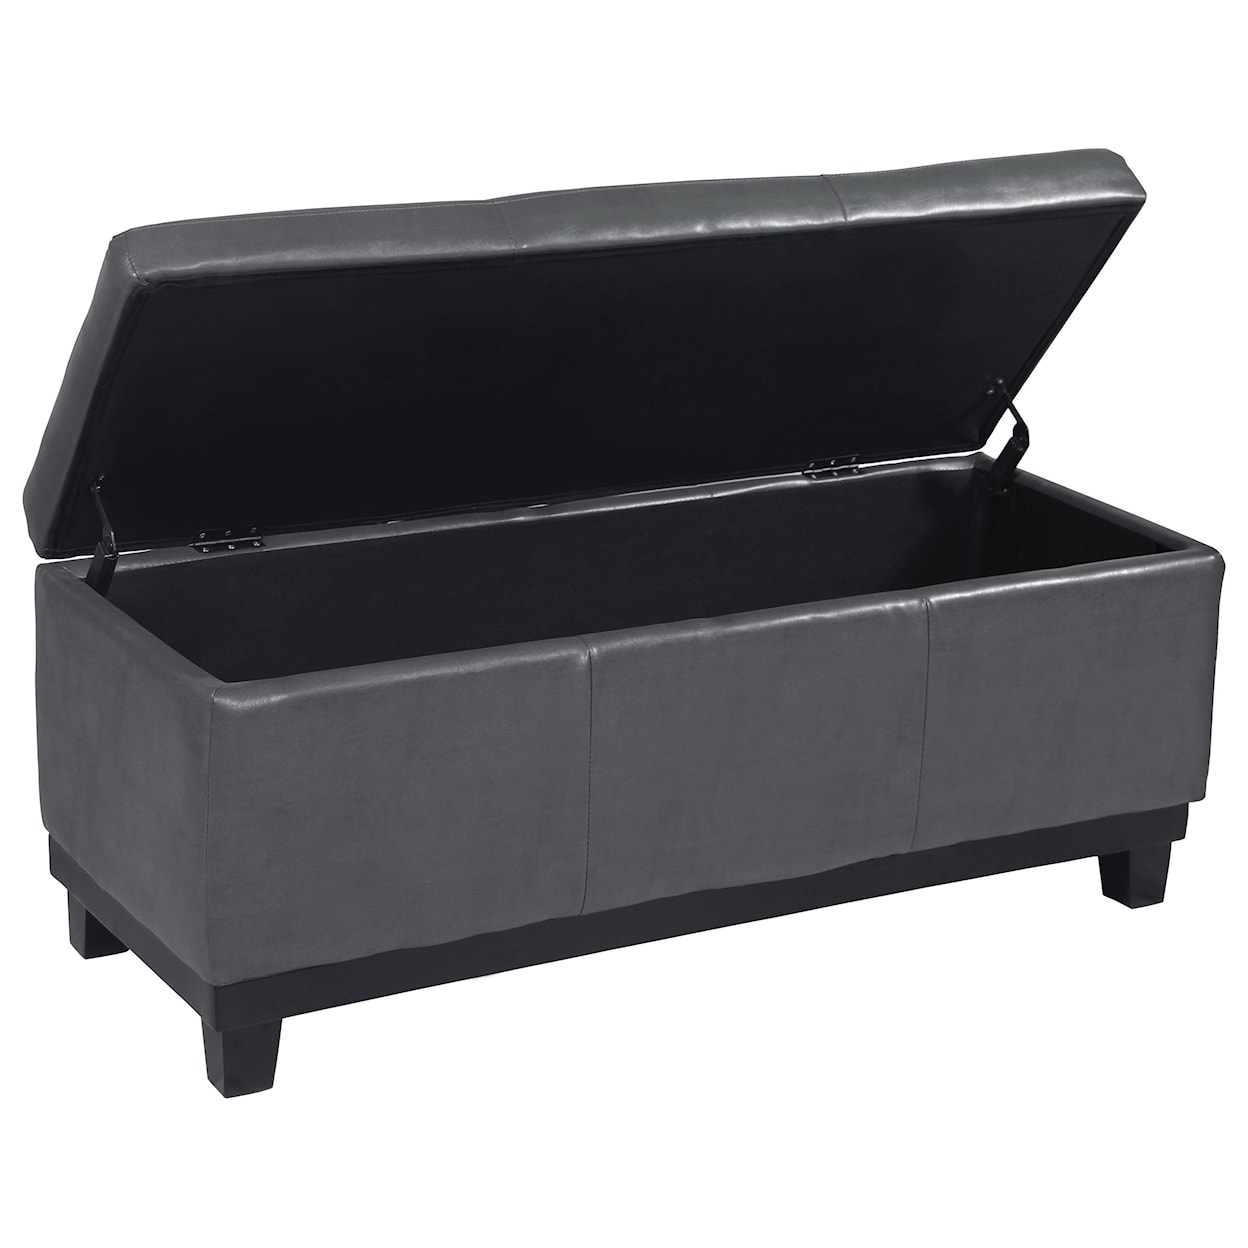 Offshore Furniture Source Susana Benches Grey Lift Top Bench